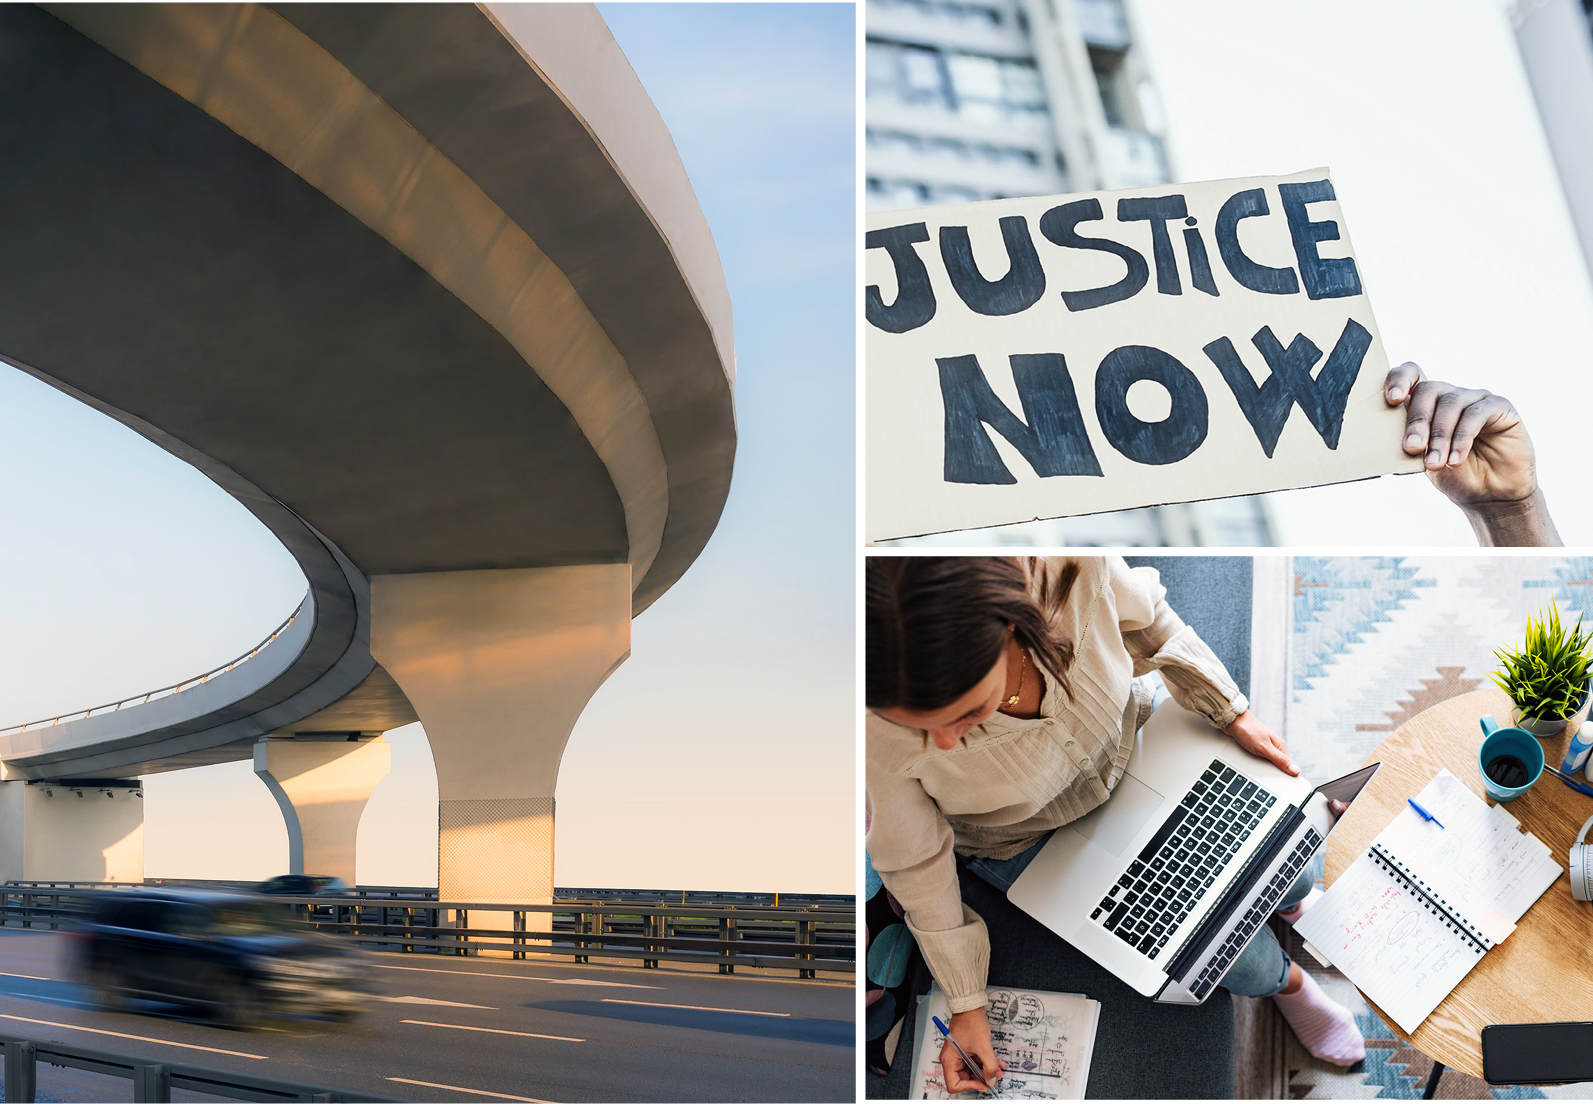 Infrastructure, The New Normal, Justice